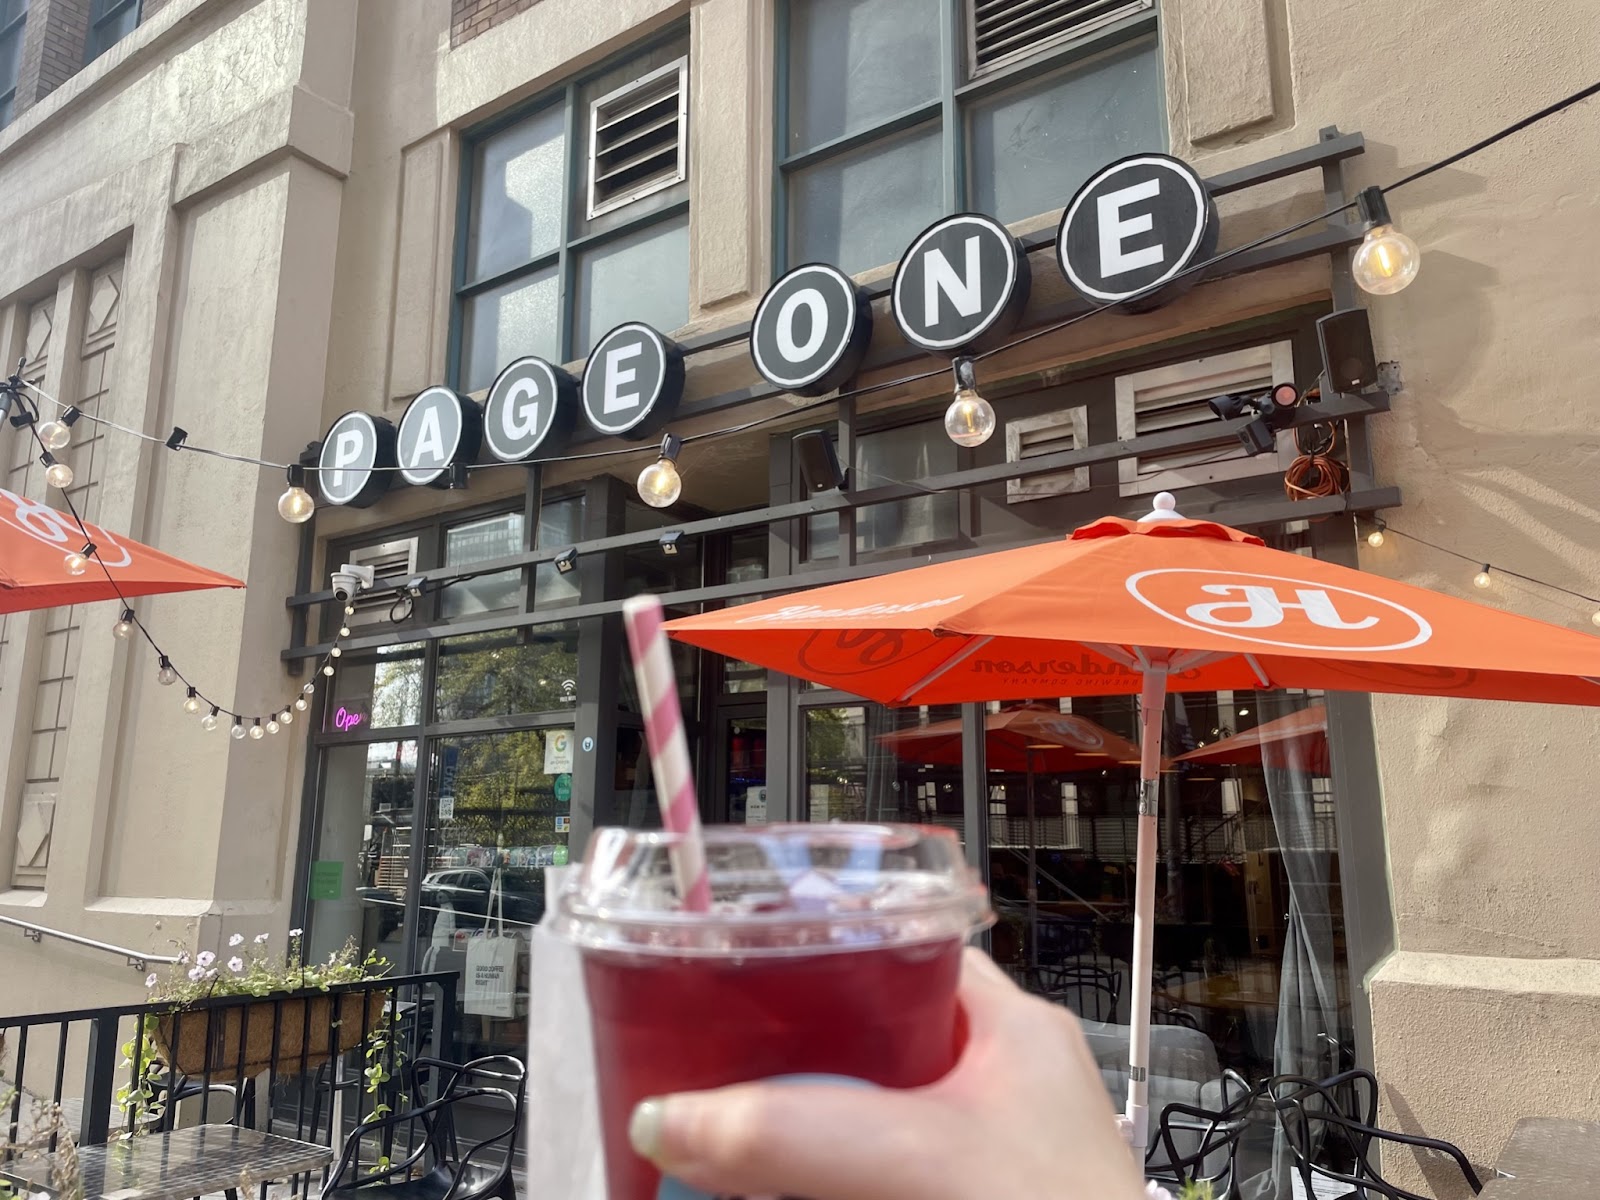 Jennifer holding a drink in her hand, the Page One cafe entrance and sign can be seen in the background.